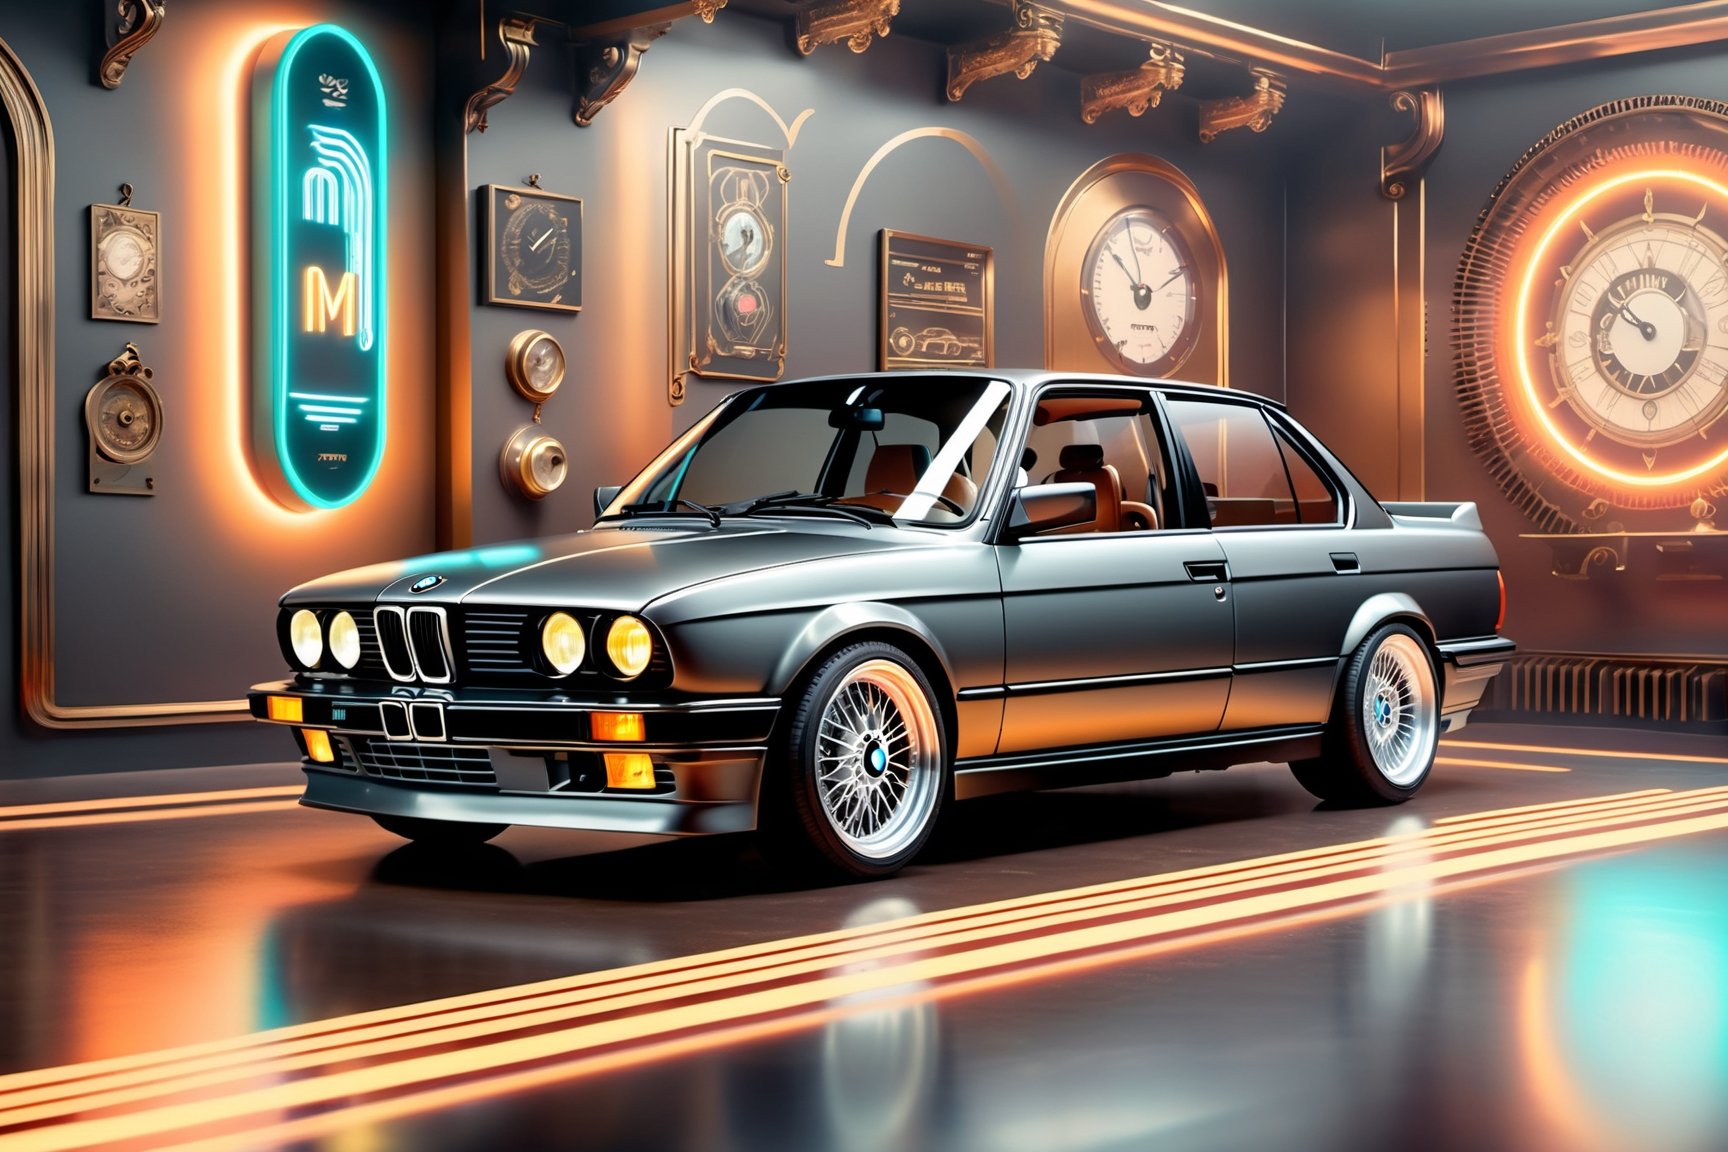 Neo-Rococo, Retro-themed illustration, (Gunmetal Grey BMW E30 Mtech:1.3) with a vintage twist, (Old-school cool:1.3), (Classic lines:1.2), (Nostalgic charm:1.2), BREAK, (backdrop backdrop:1.3), (Retro vibes:1.3), (Neon signs:1.2), (Vibrant atmosphere:1.2), Created with a retro touch, Timeless color palette, Distinctive details, curved forms, naturalistic ornamentation, elaborate, decorative, gaudy, Neo-Rococo, volumetric, fog, smoke
,steampunk style,DonMCyb3rN3cr0XL 